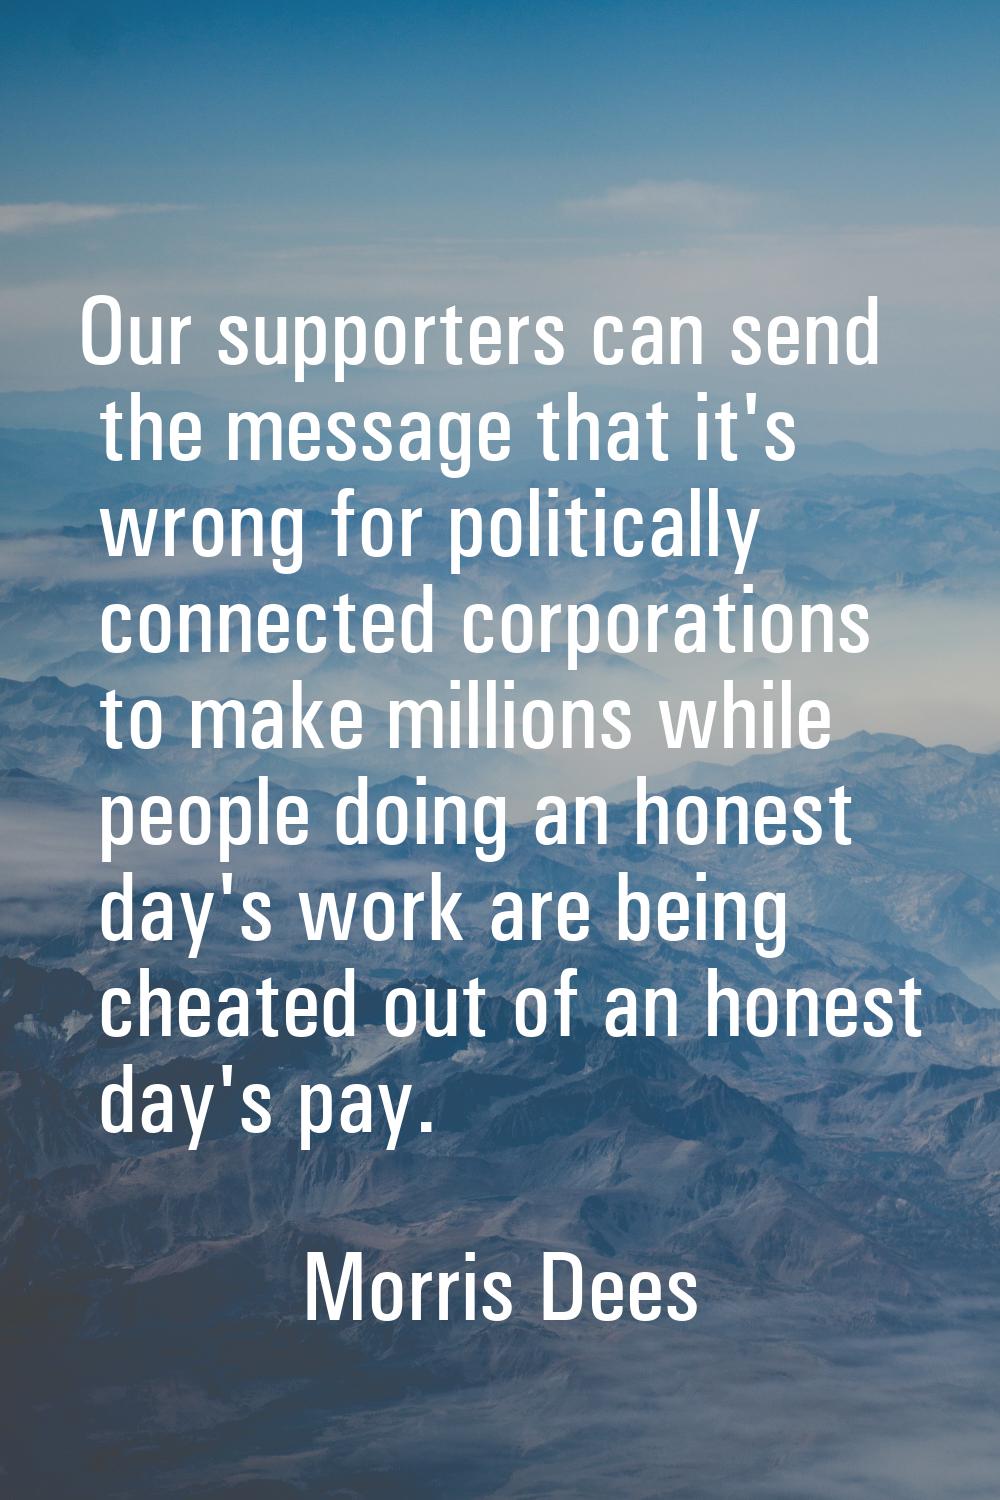 Our supporters can send the message that it's wrong for politically connected corporations to make 